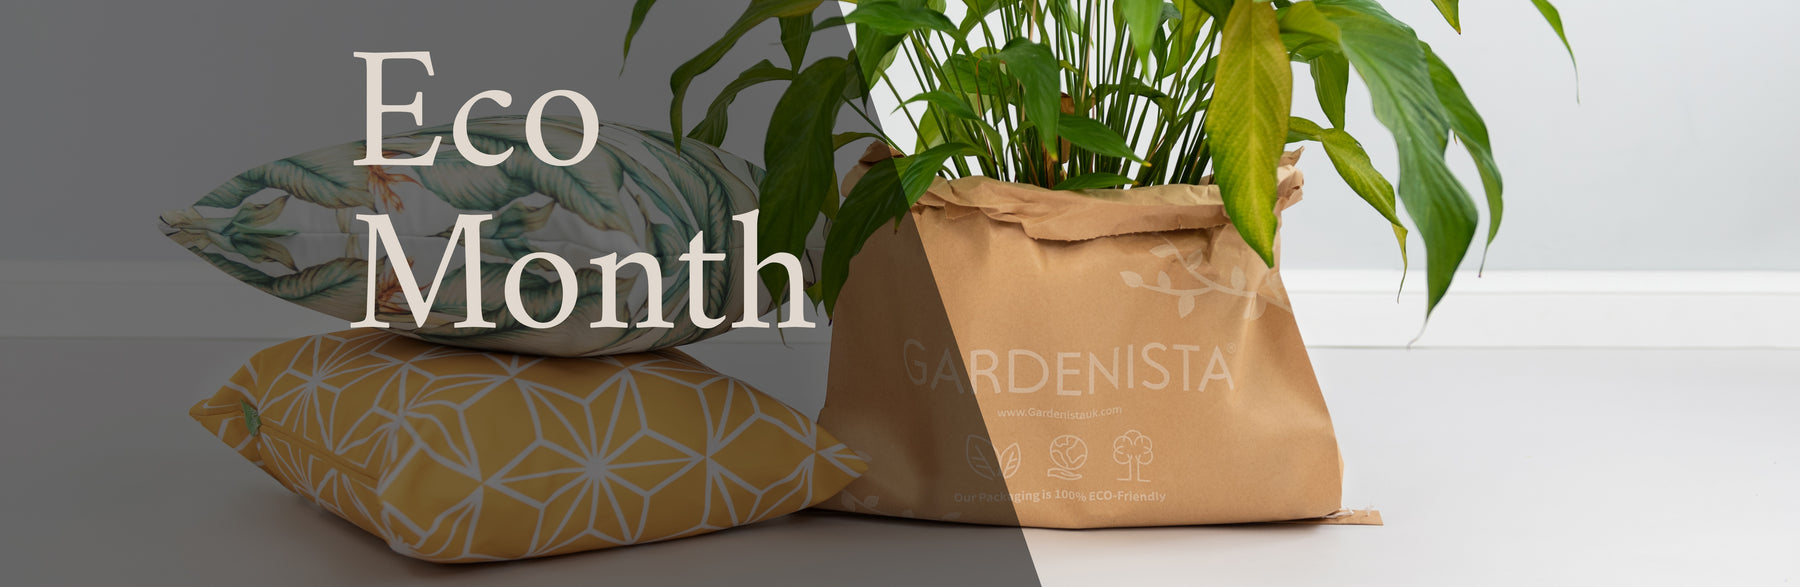 Introducing Eco Month at Gardenista